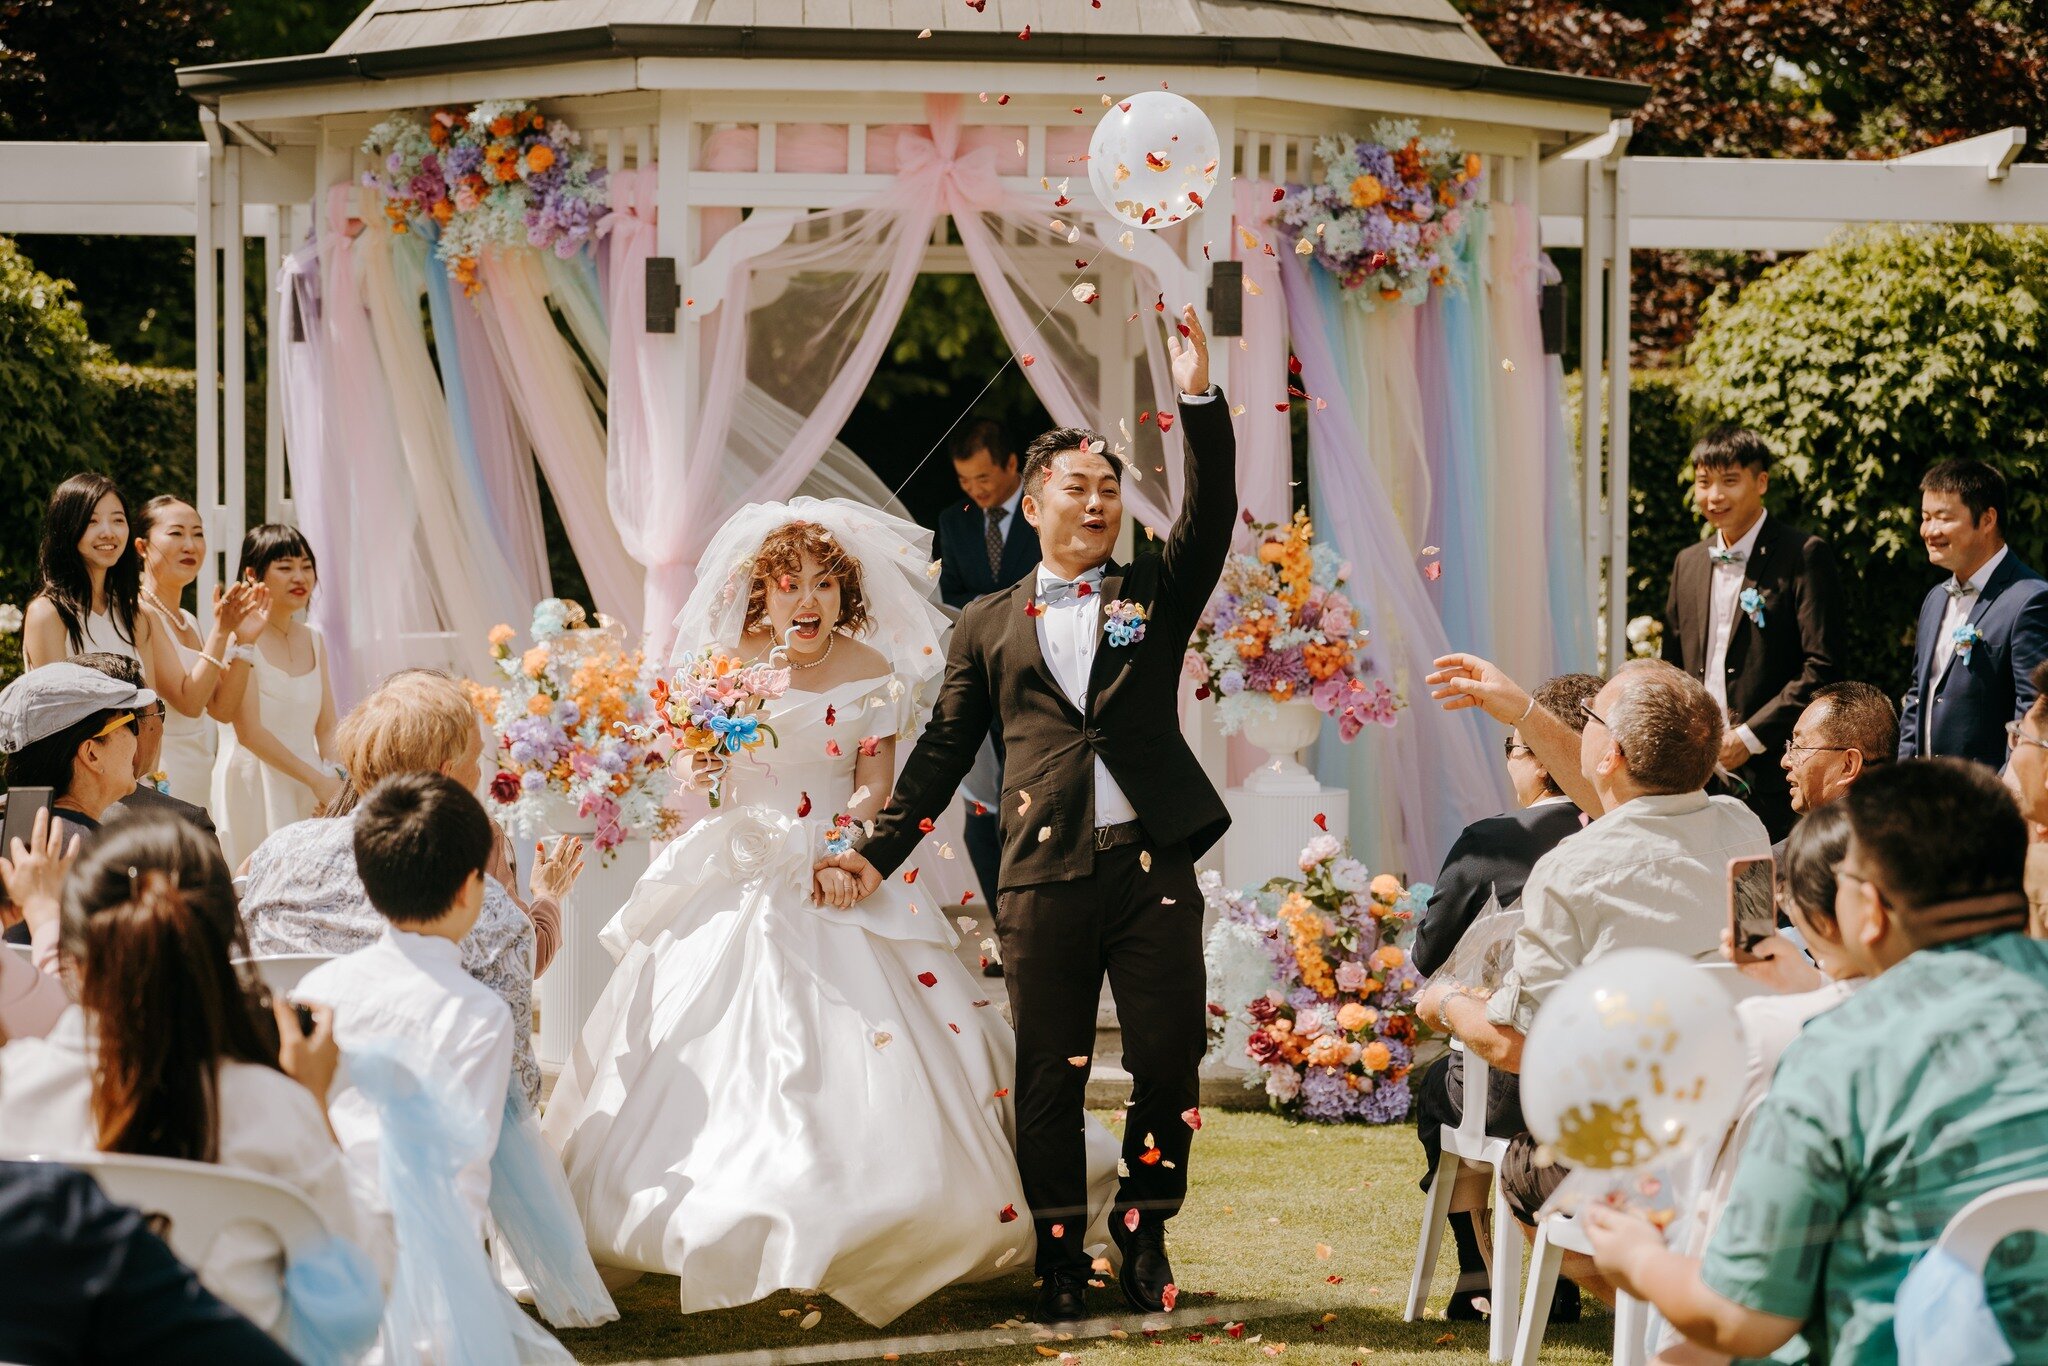 One of the most colourful weddings in the history of Lacebark! Charmaine &amp; Xi certainly know how to plan a great party. We loved being part of their unique, fun and special day 🫶

📸 by @agnesgrace_photoandfilm 
.
.
#colourfulwedding #nzwedding 